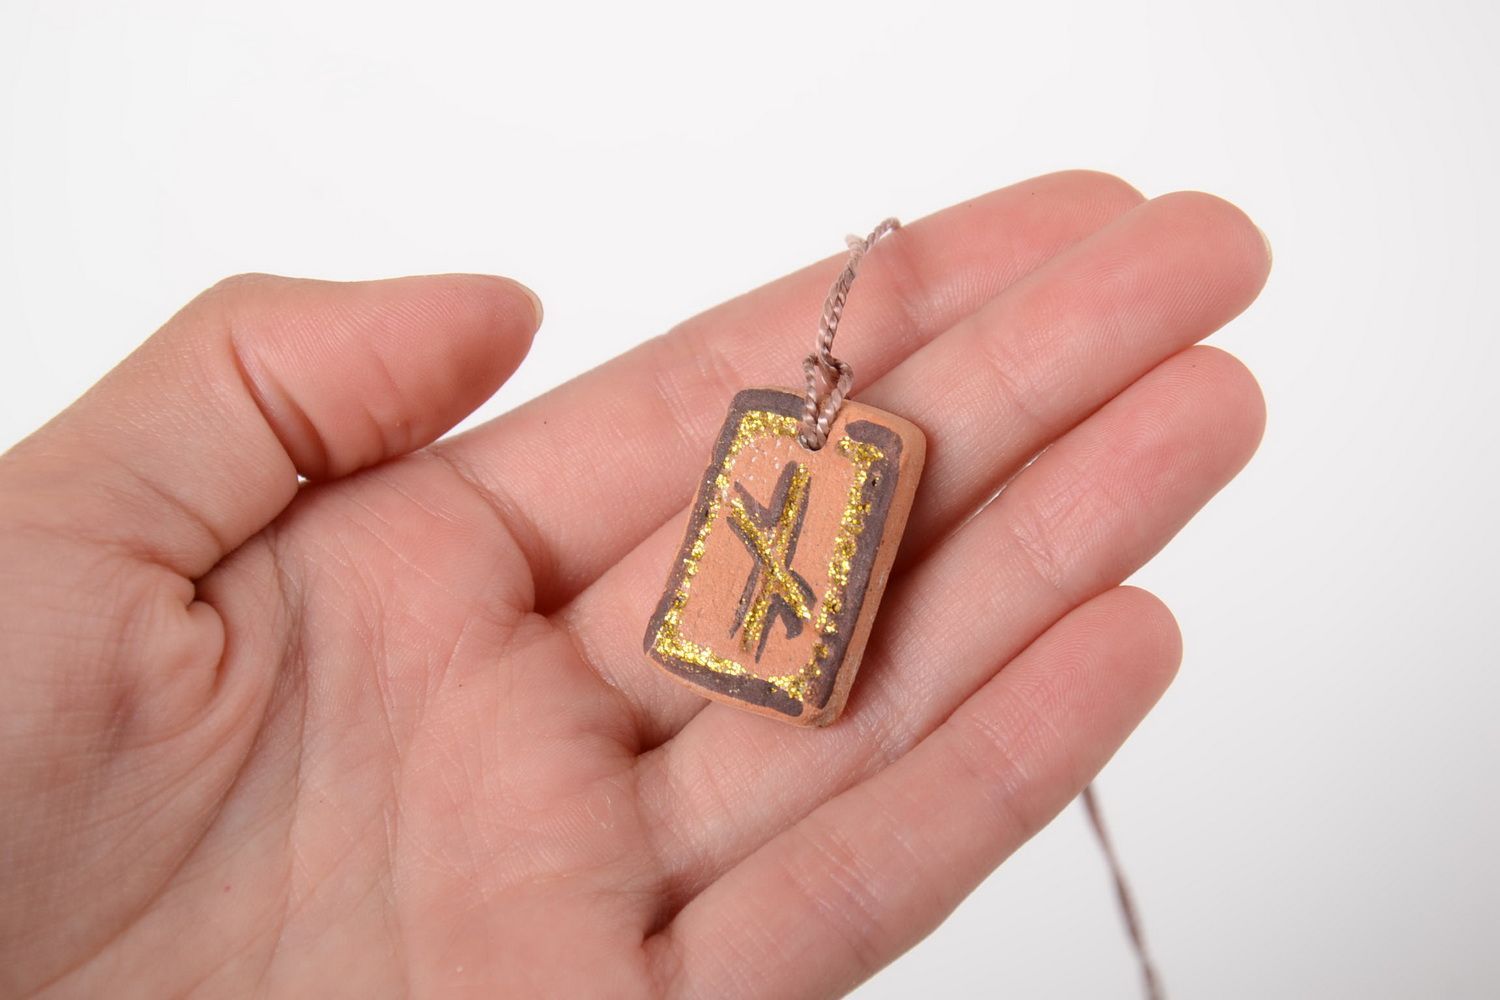 Handmade ceramic jewelry pendant necklace rune meaning necklace designs photo 3